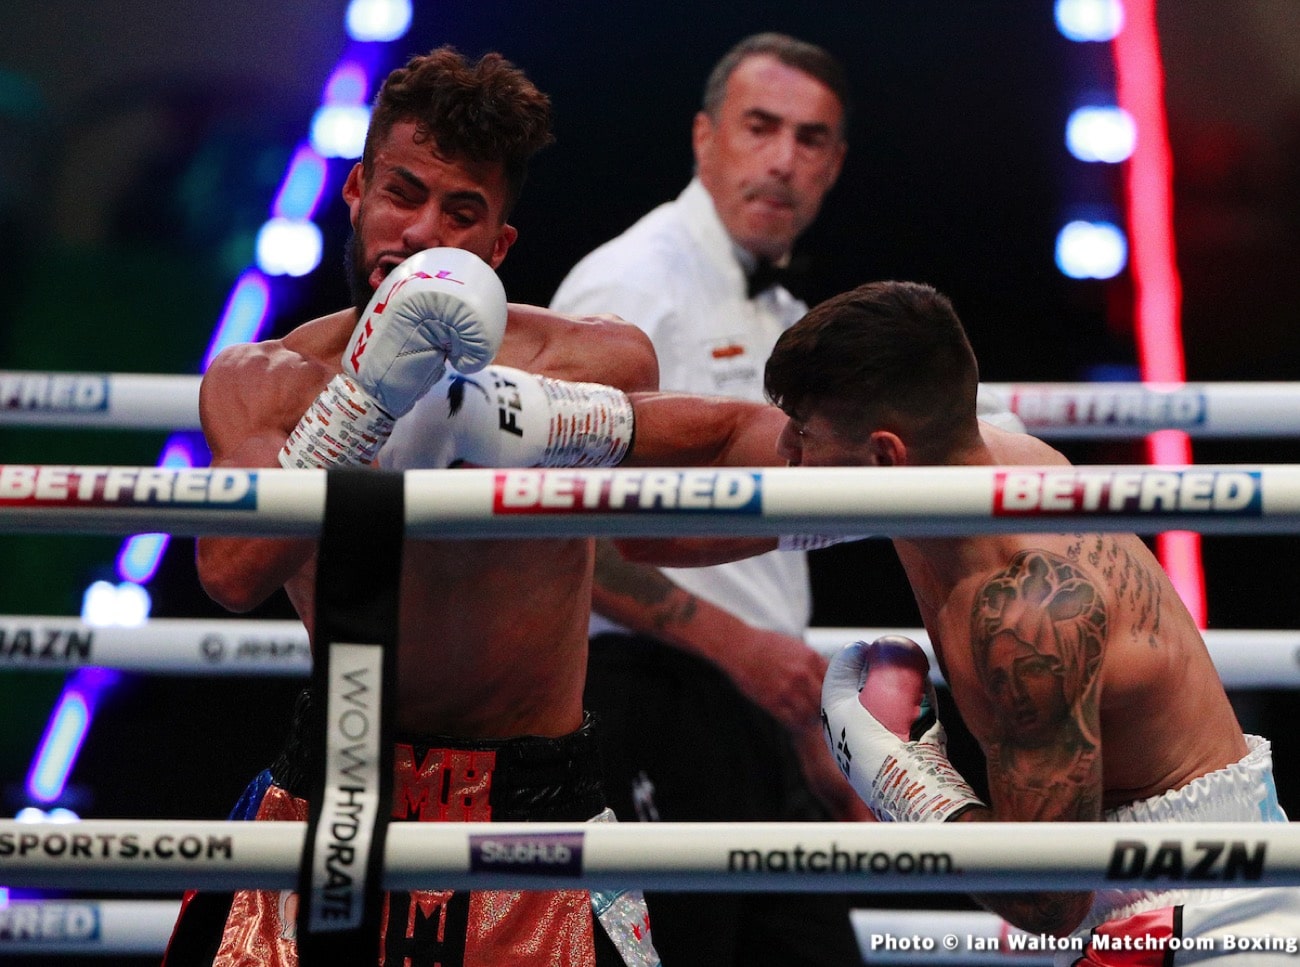 Image: Boxing Results: Joshua Buatsi Stops Ricards “The Lion” Bolotniks in the UK!